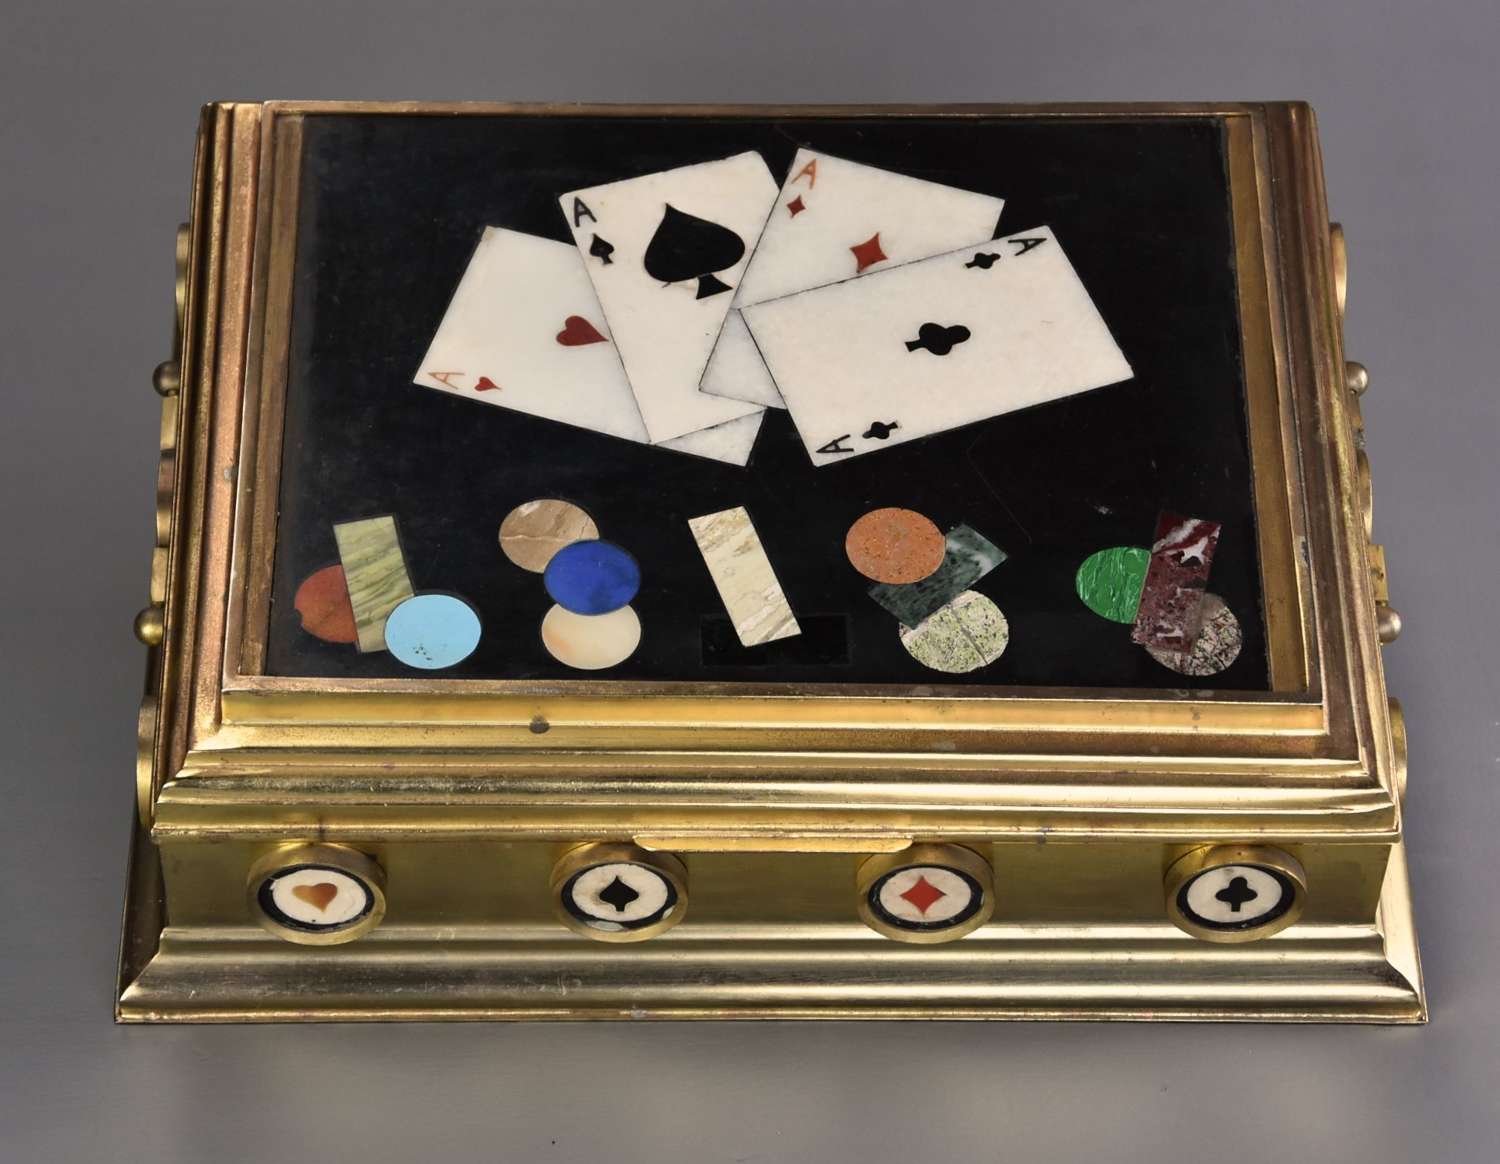 Highly decorative mid/late 19thc Pietre Dure and gilt brass games box